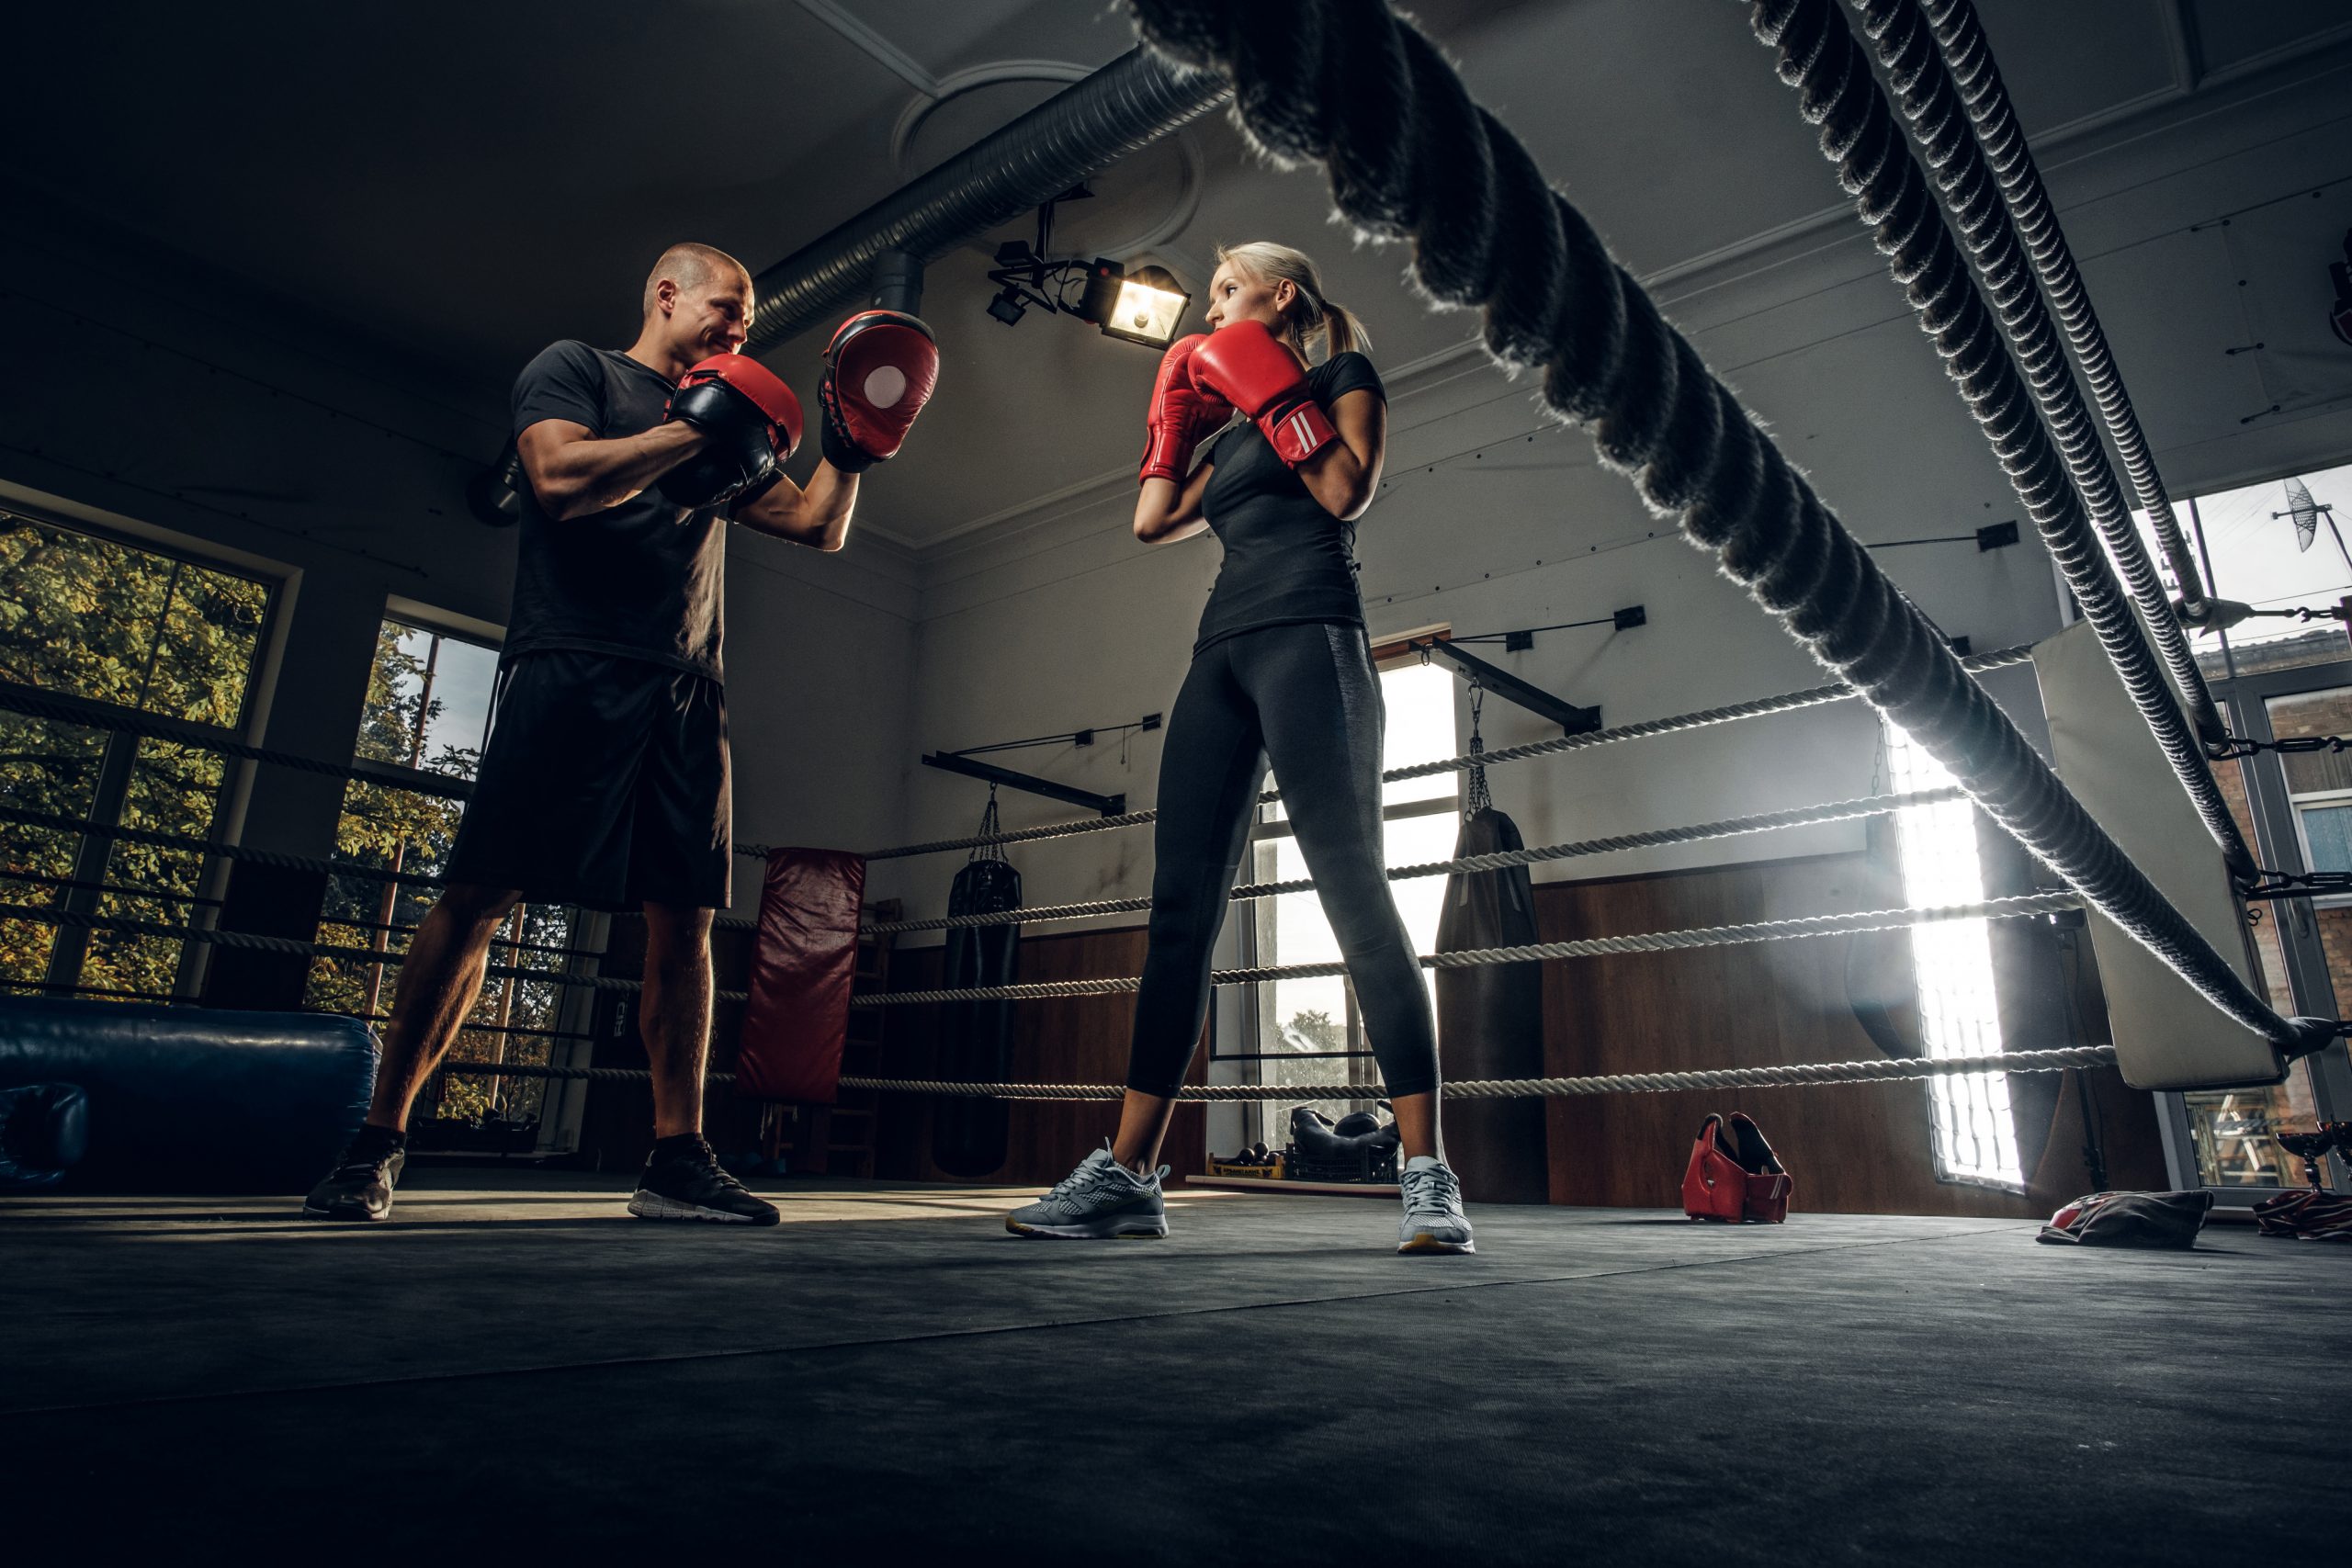 Boxing trainer and his new student have a sparring on the ring wearing boxing gloves.